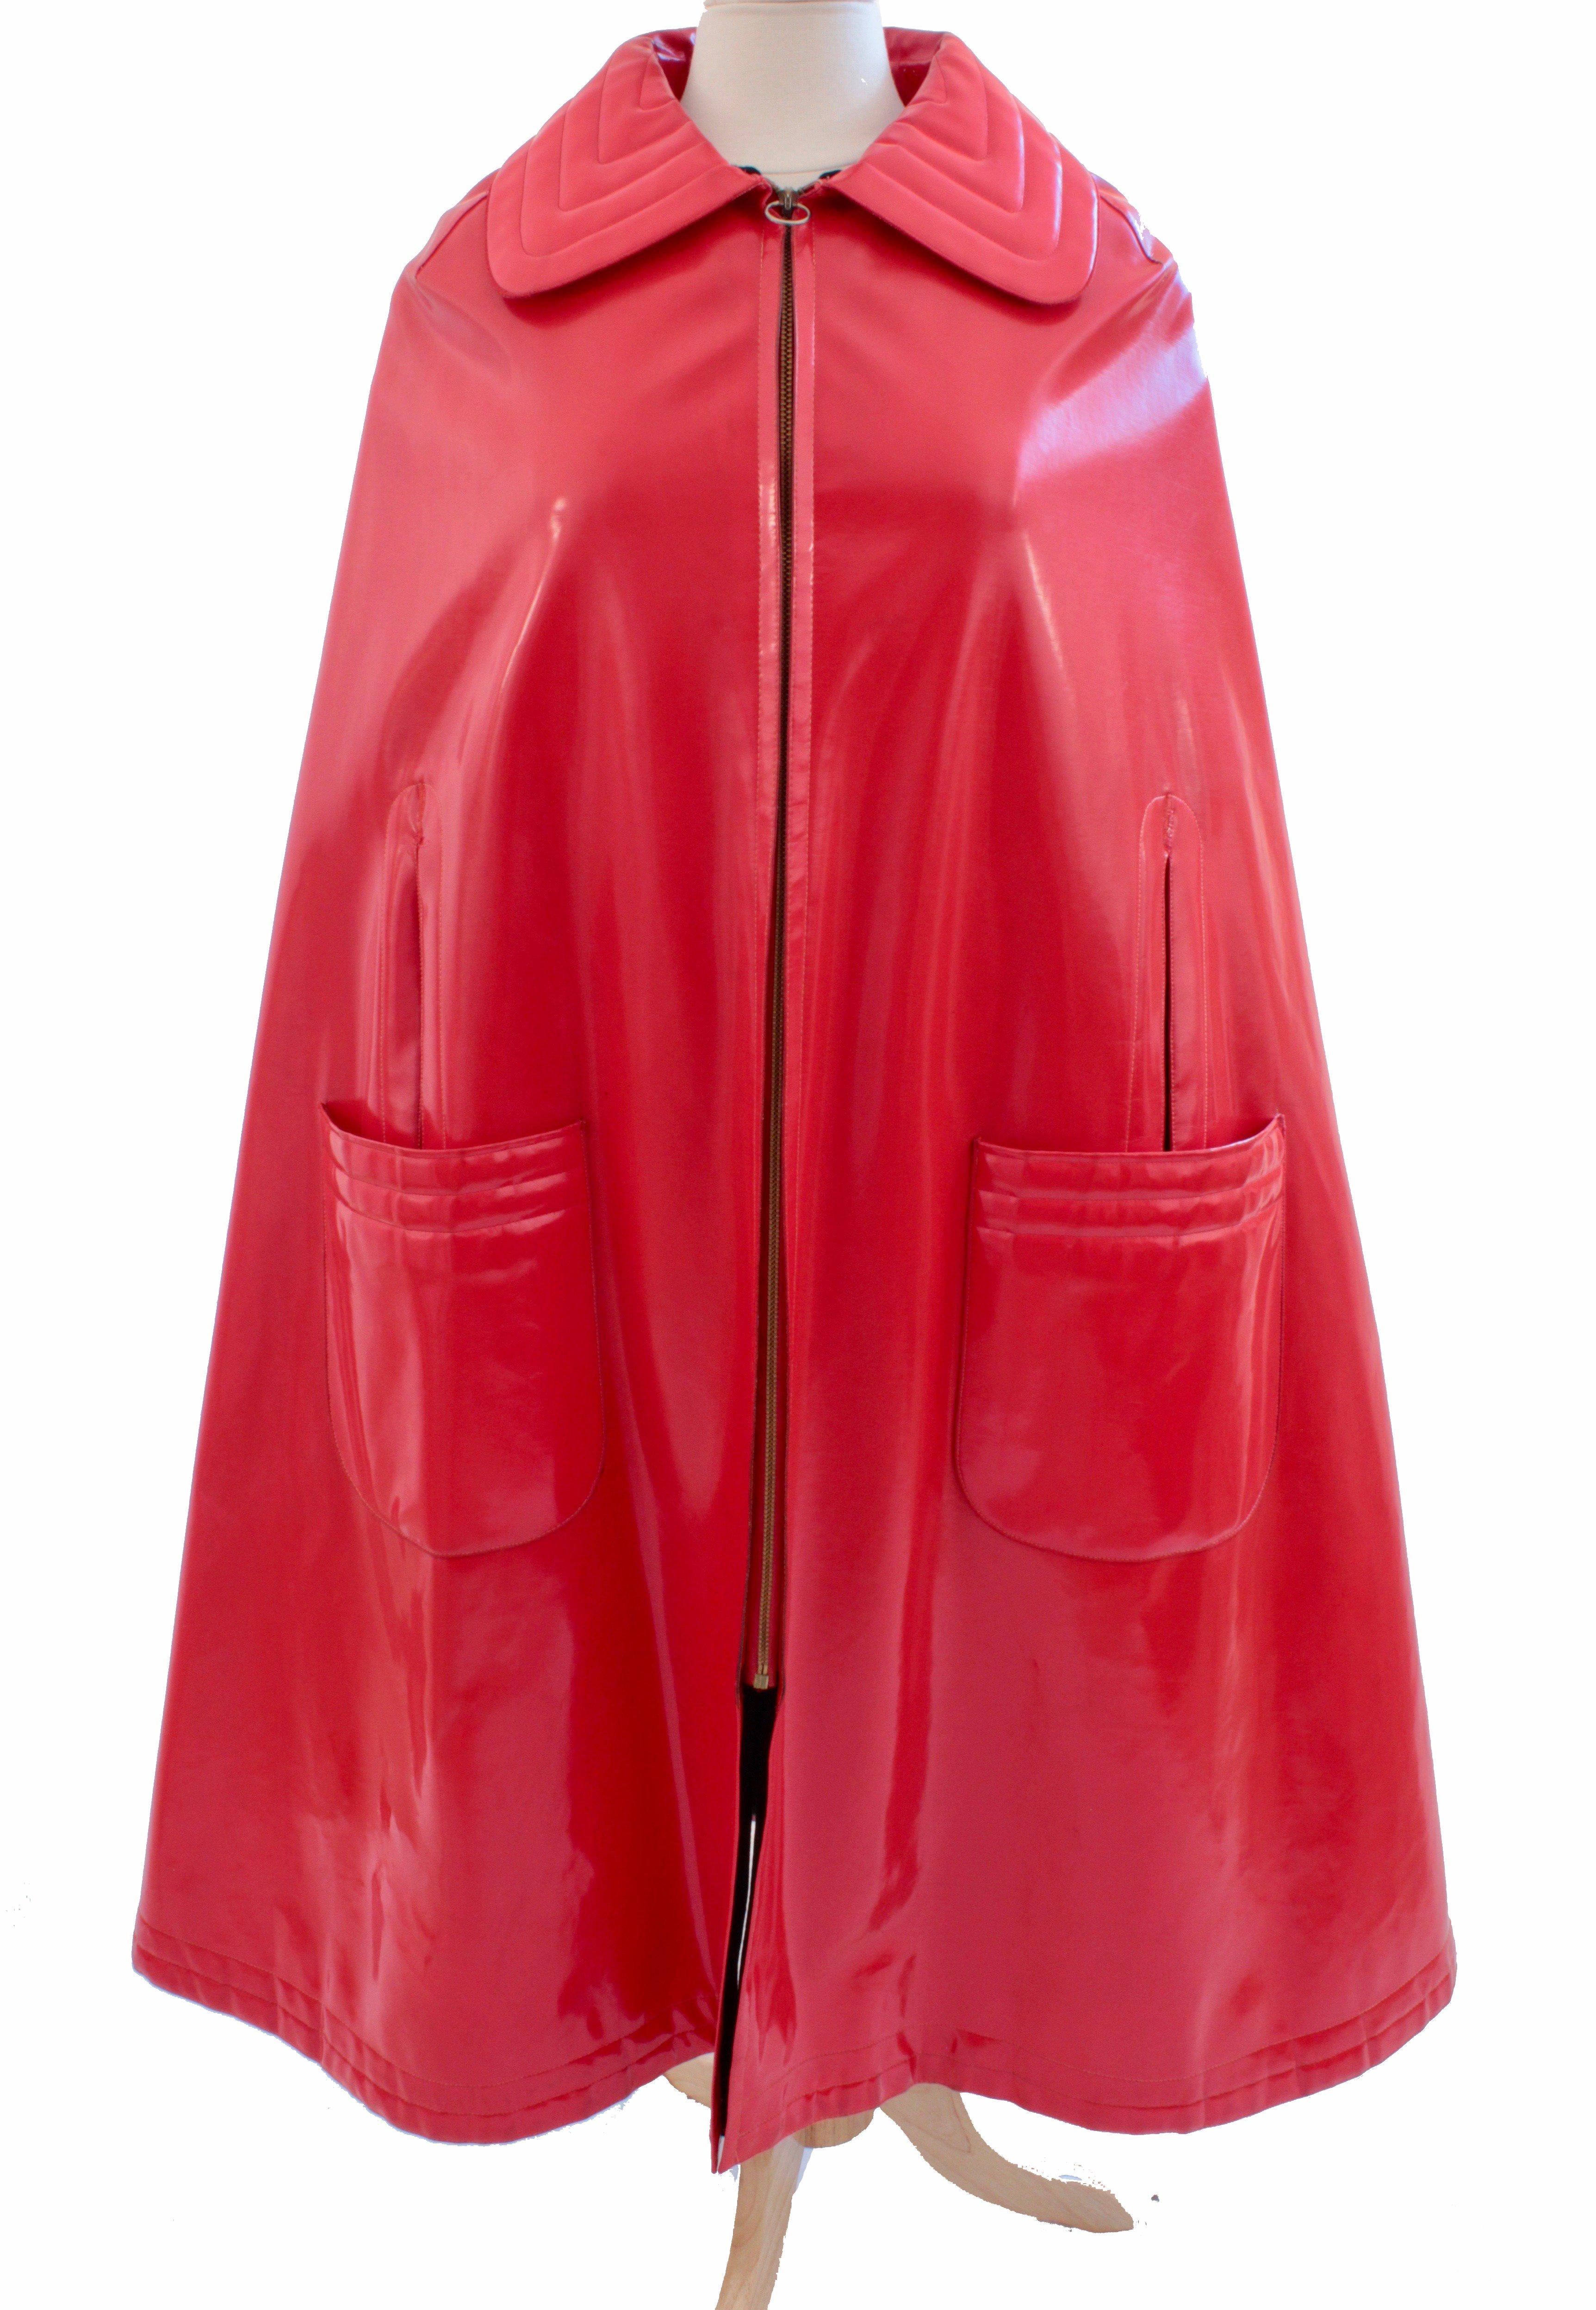 This fabulous space age cape was made by Pierre Cardin for his Space Age and Futurism Collection in the late 60s. Made from a soft red vinyl, it features quilted stitching at the collar and on each front pocket, and a rear vent.  It fastens with a